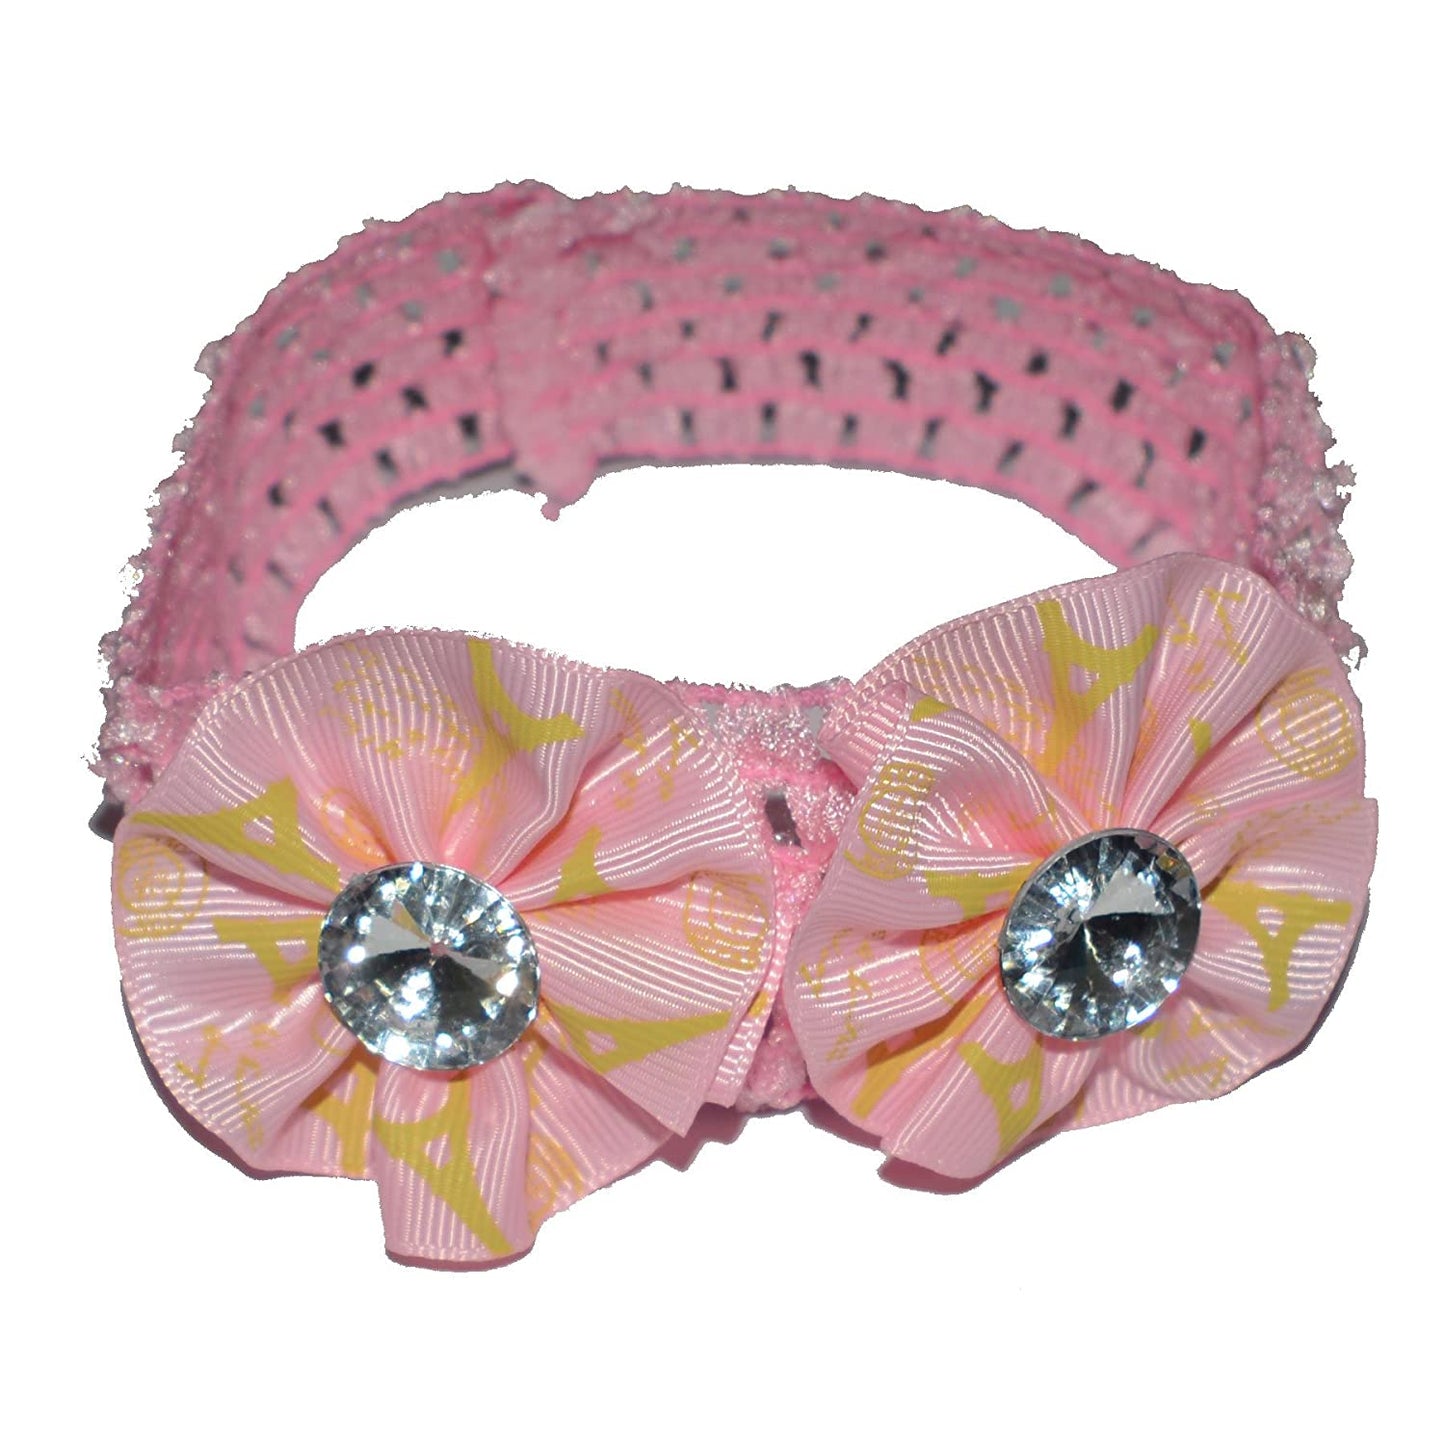 Floral Soft Stretchy Headbands for Baby Girls and Newborn (17-08 Baby Pink Baby Headband)